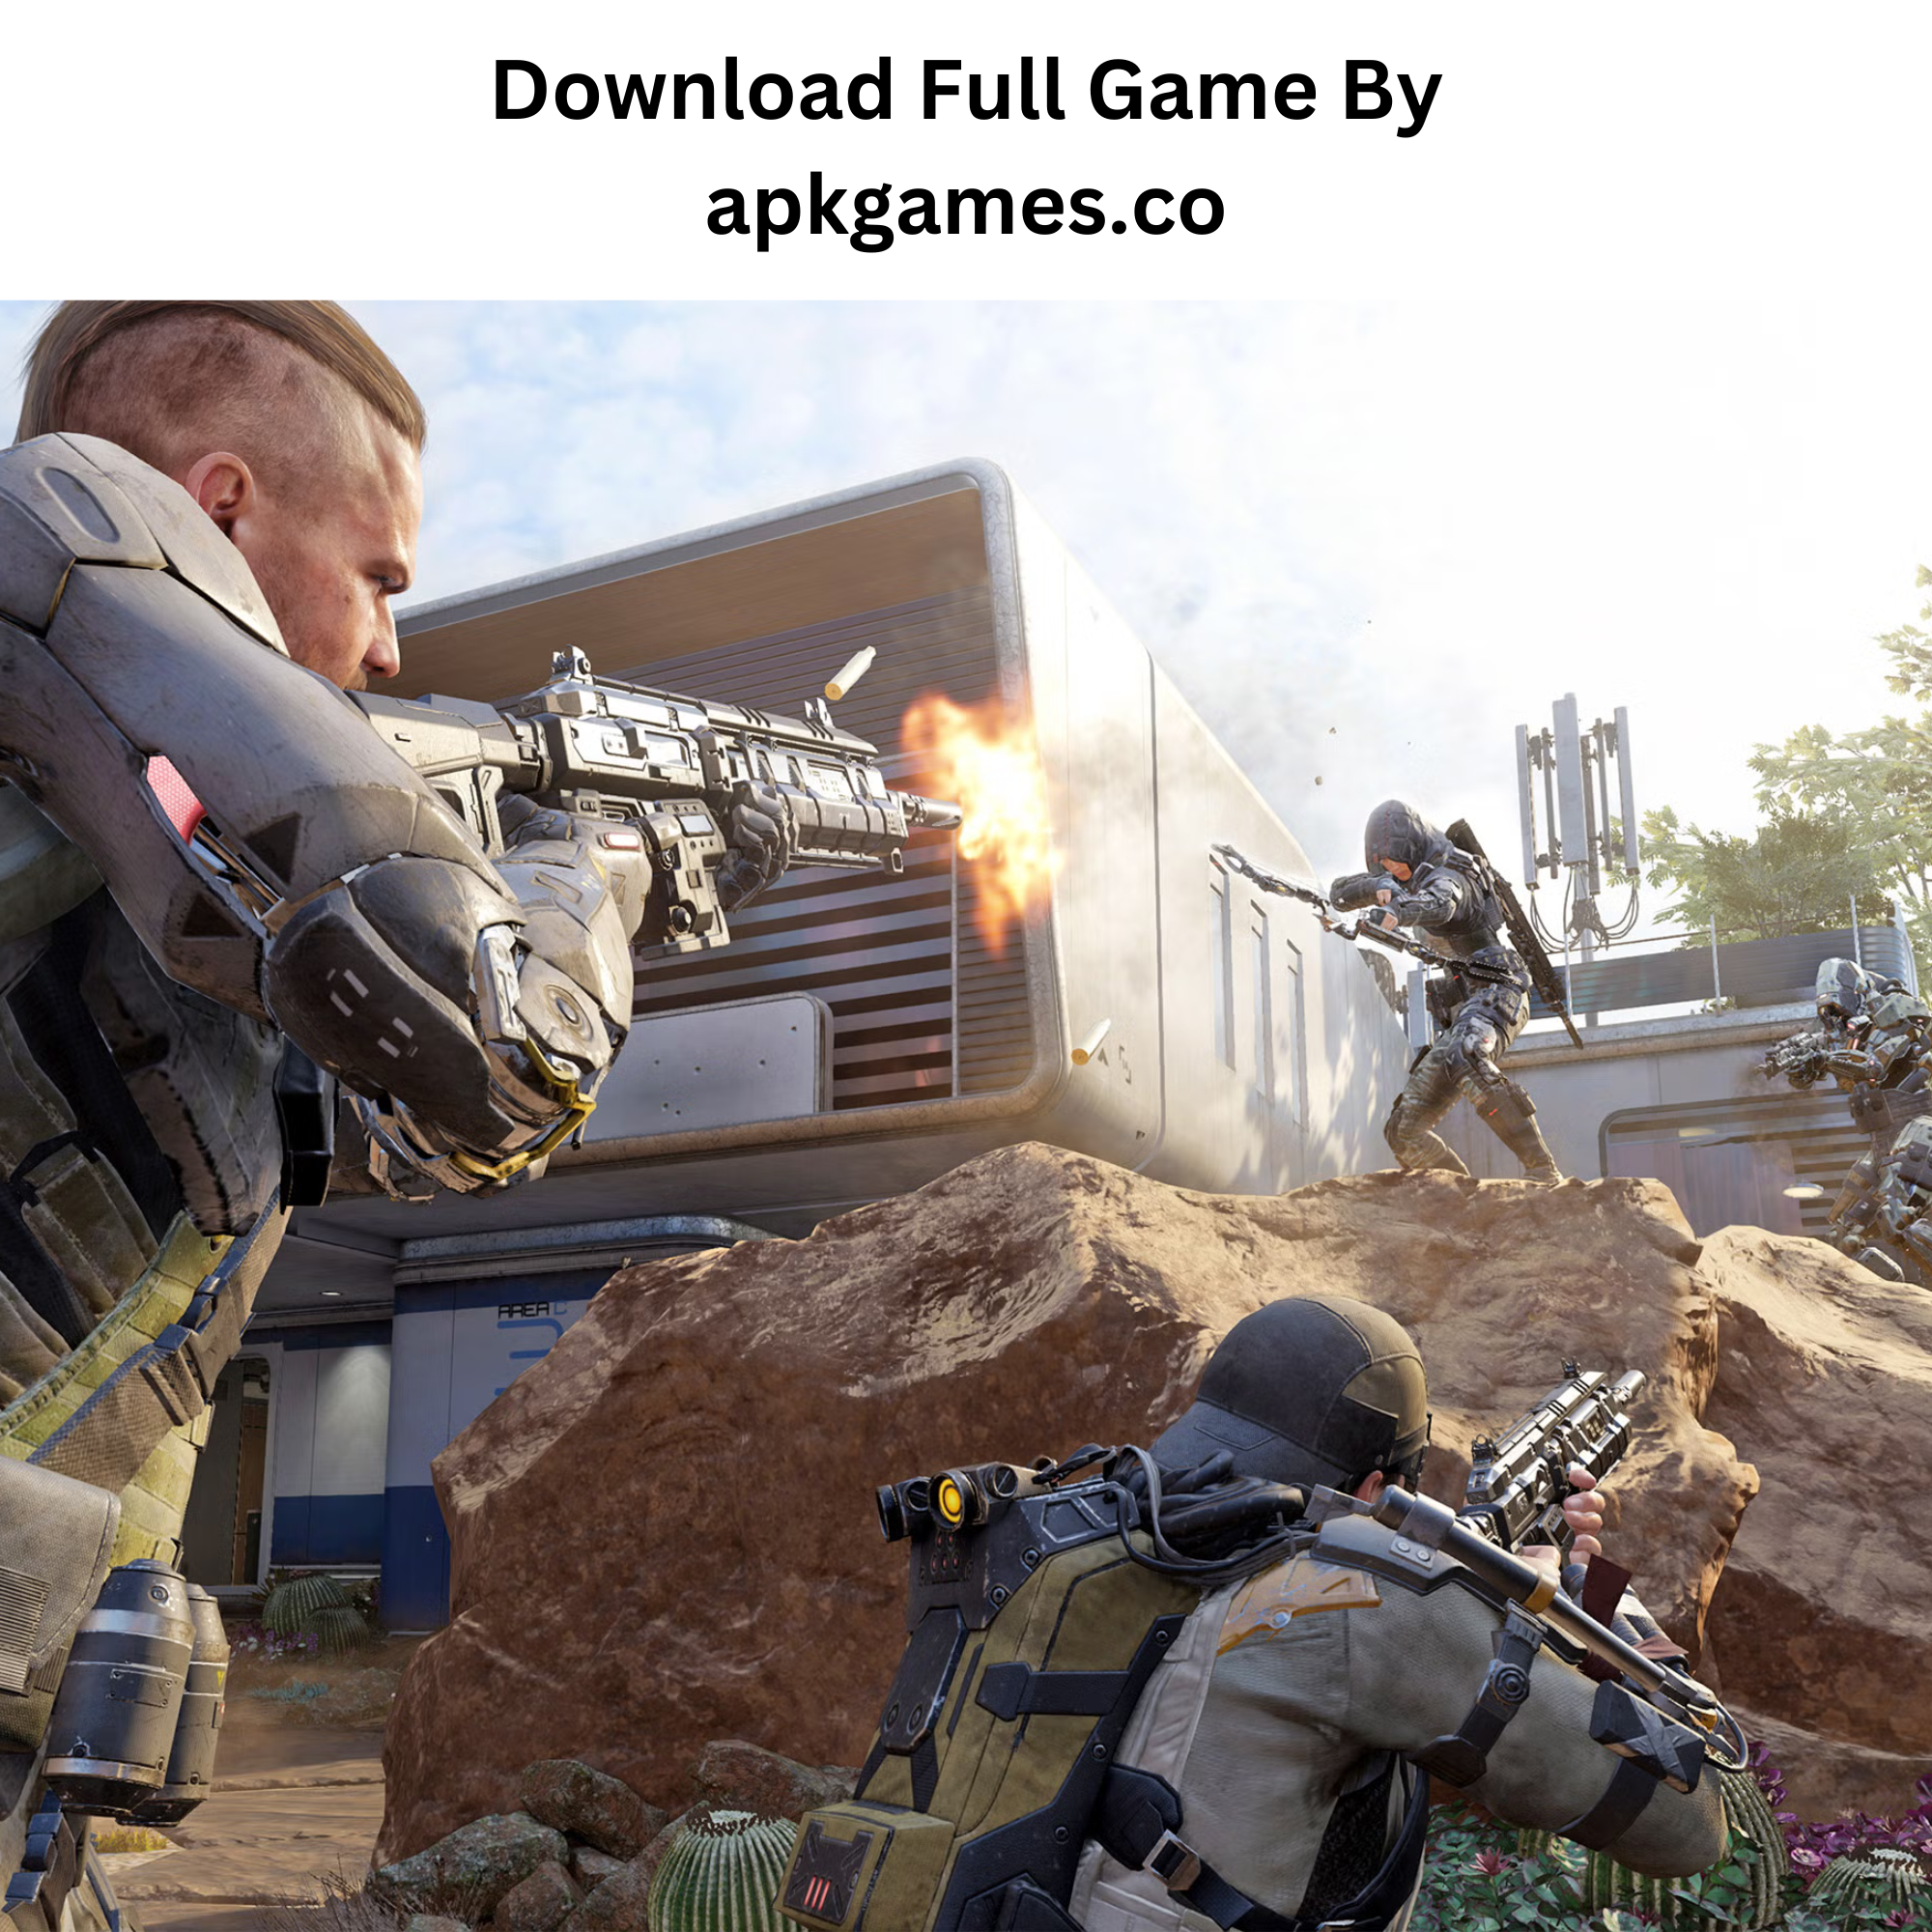 CALL OF DUTY BLACK OPS 3 PC GAME DOWNLOAD FULL